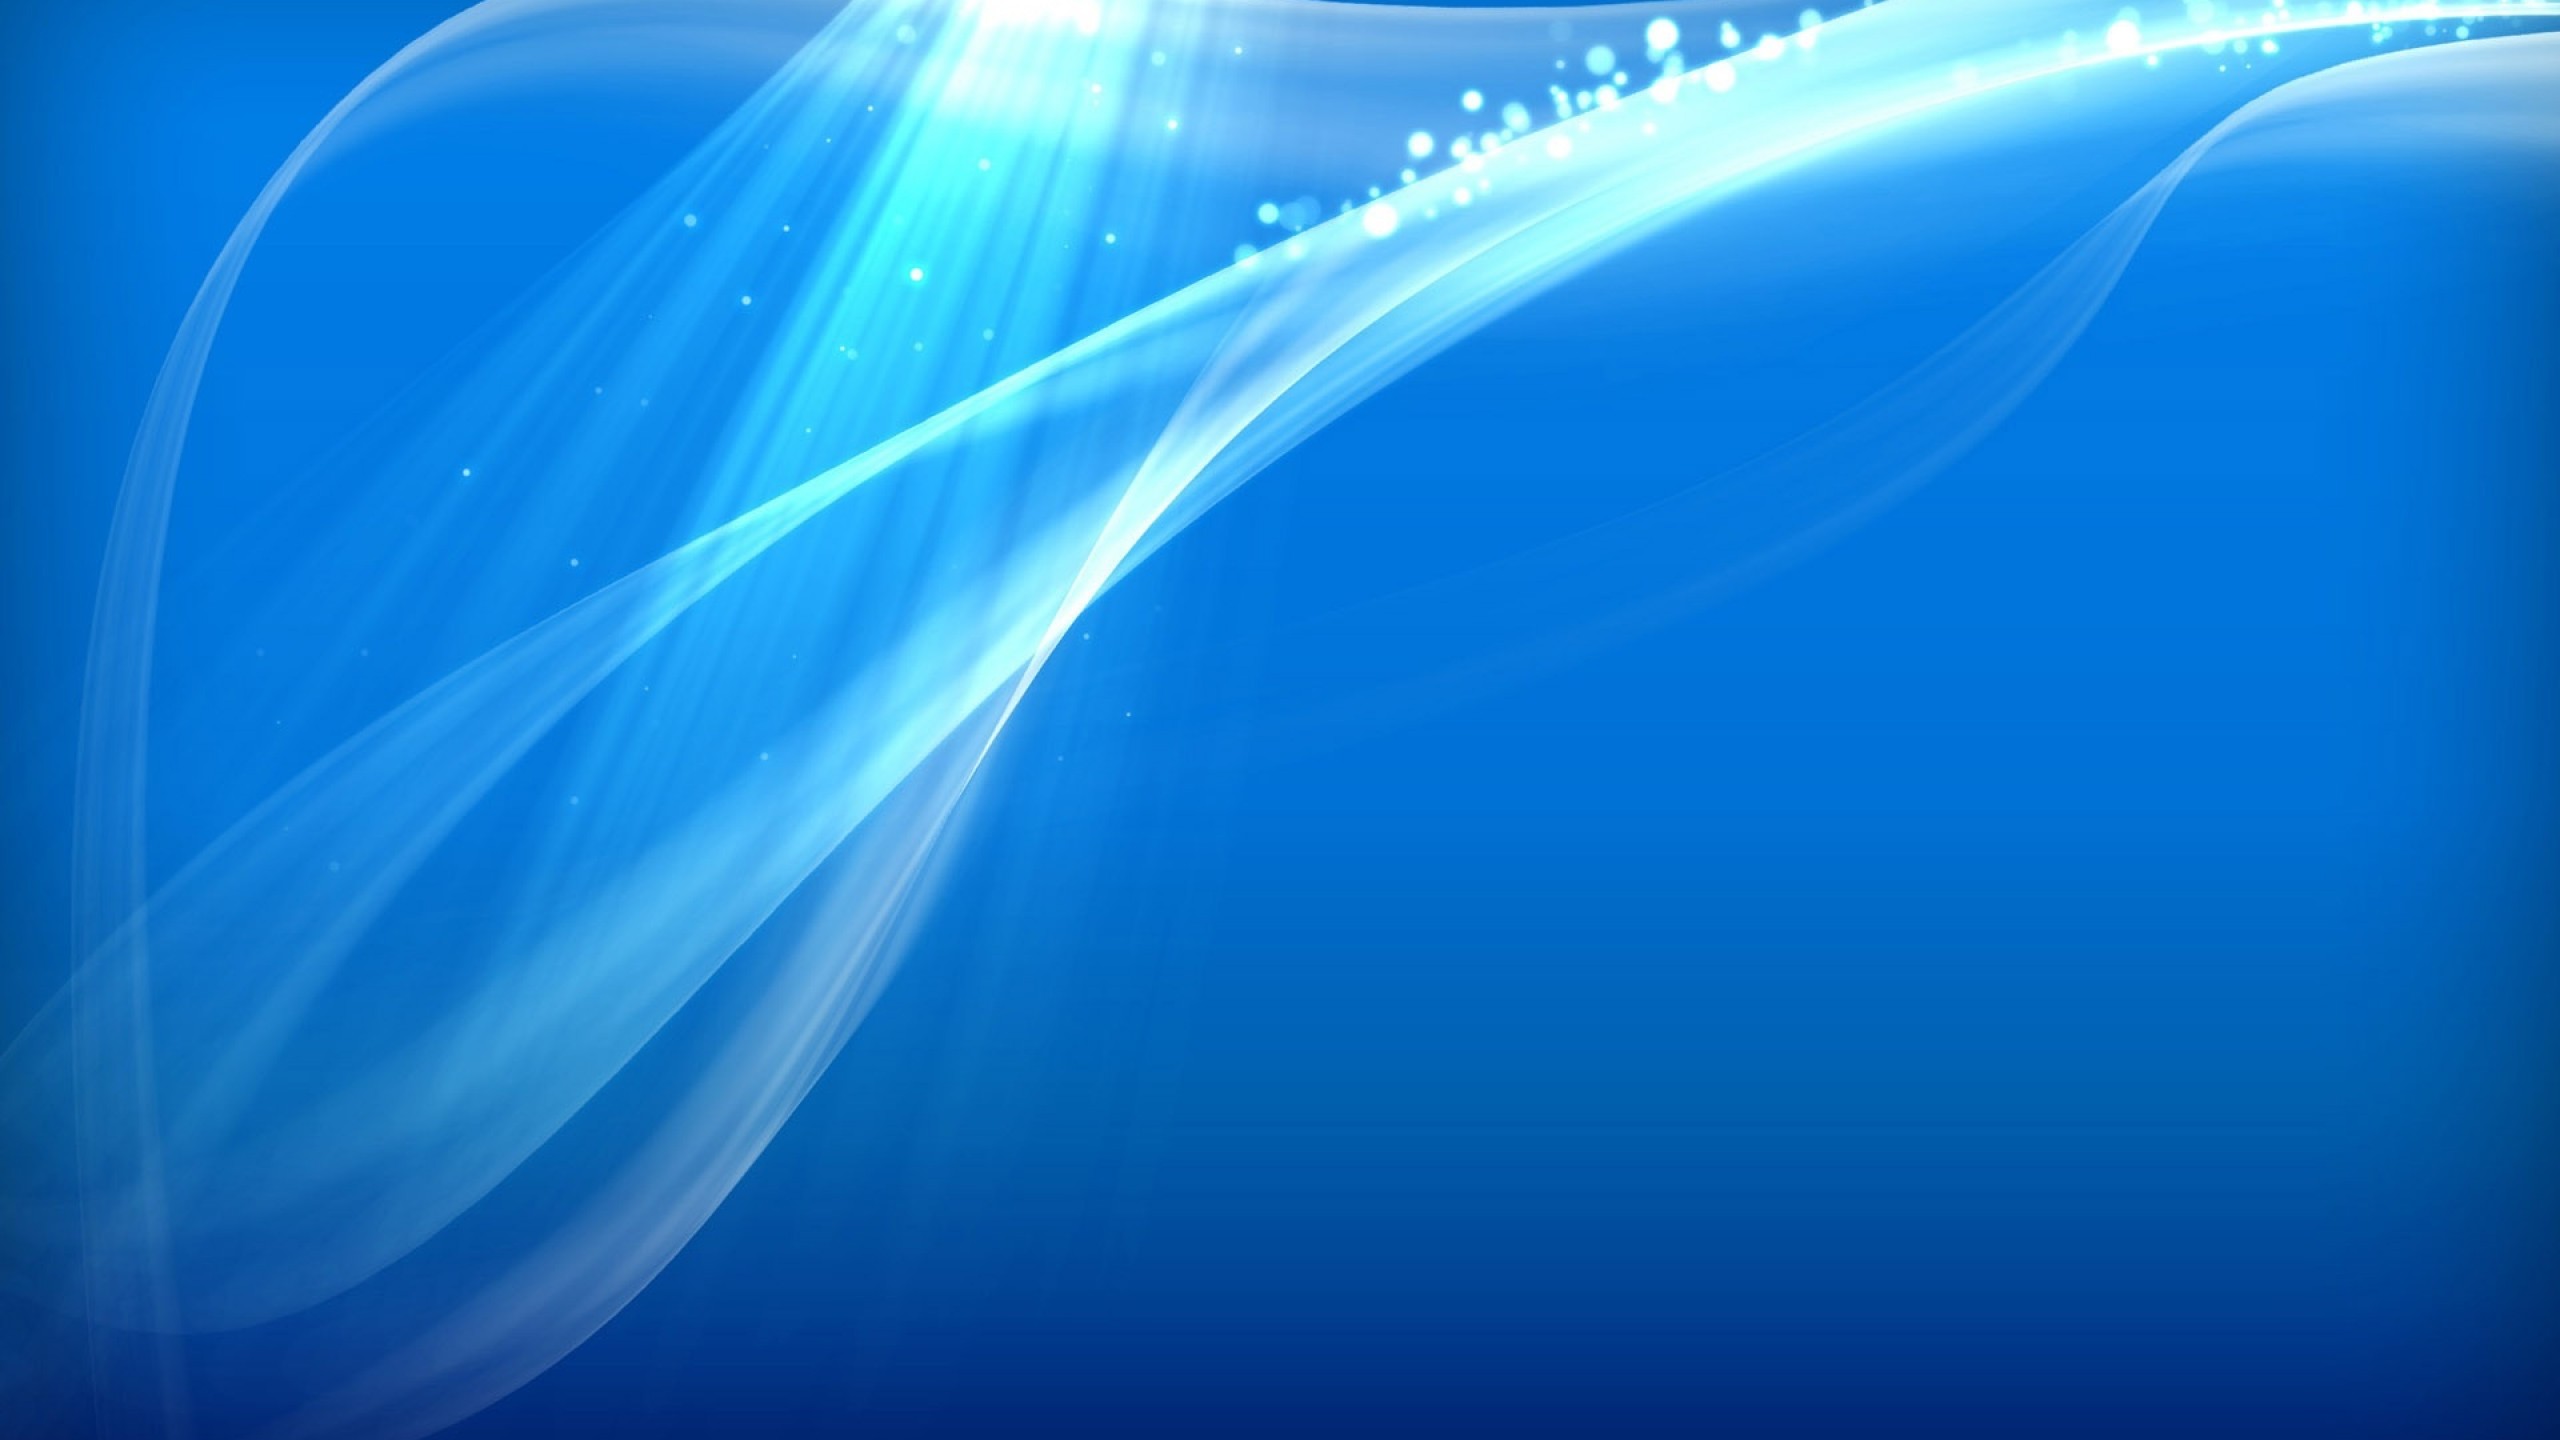 Blue Abstract Background Hd Wallpaper for Deskstop and Mobiles Youtube Cover  Photo - HD Wallpaper 